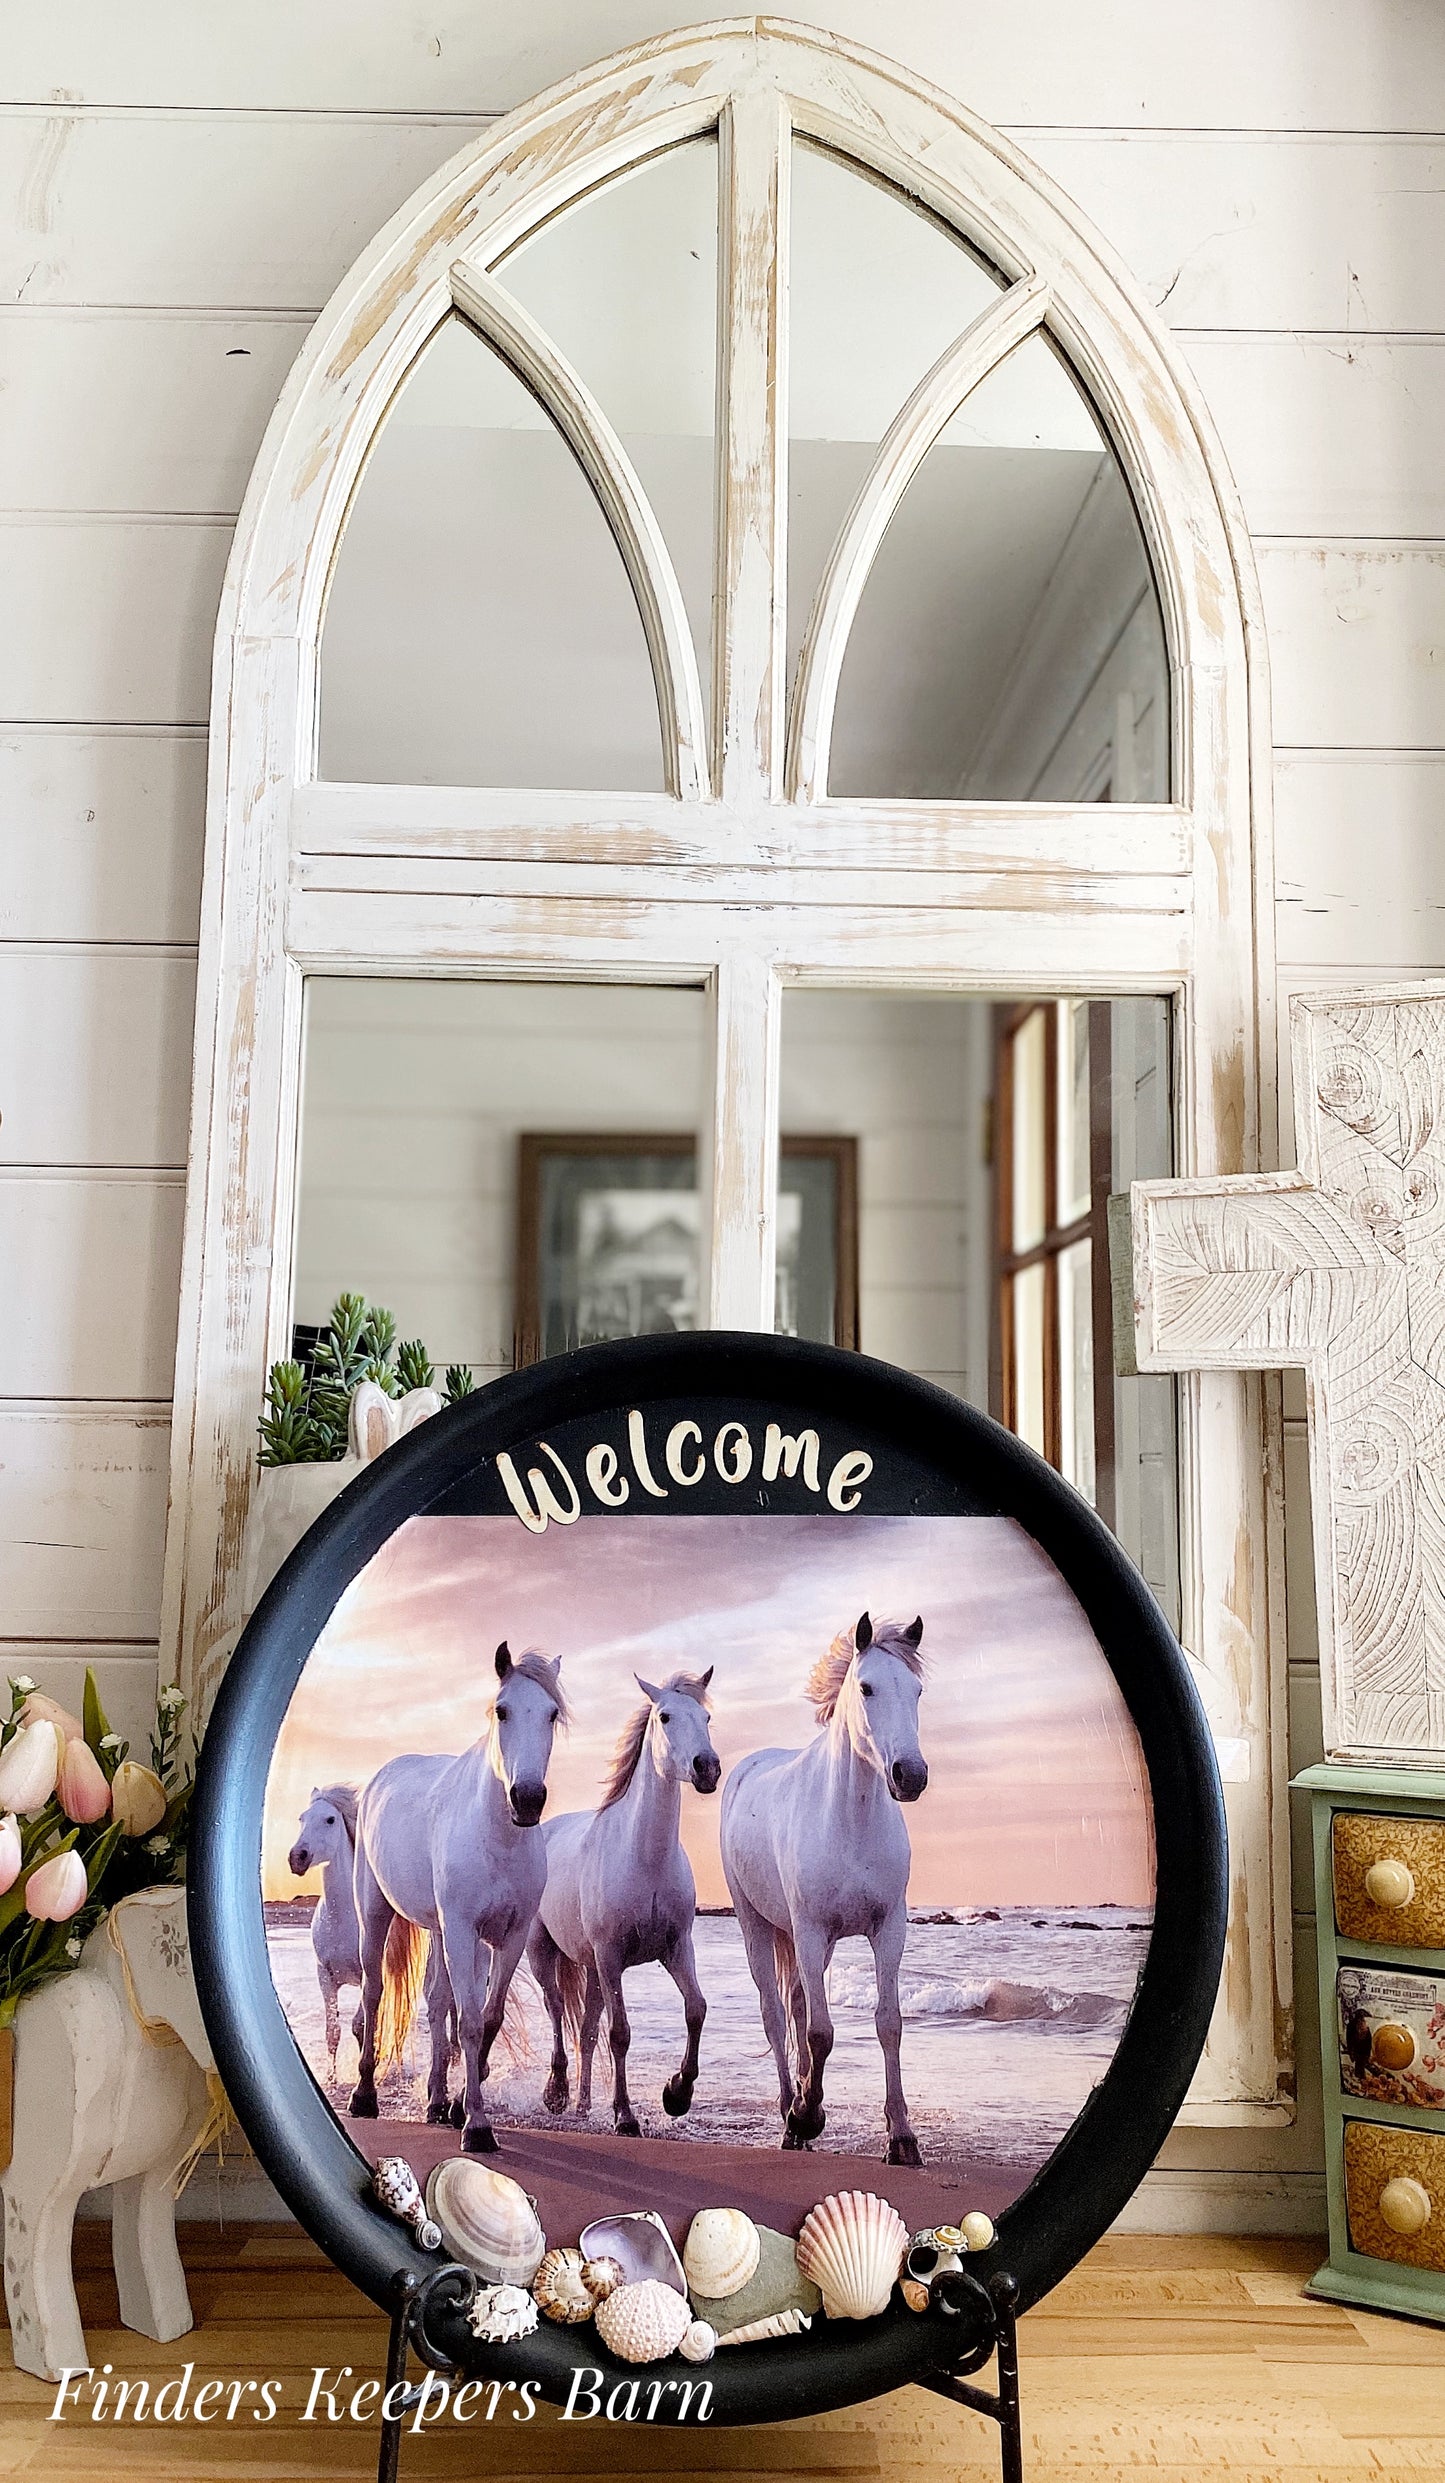 Welcome horse tray